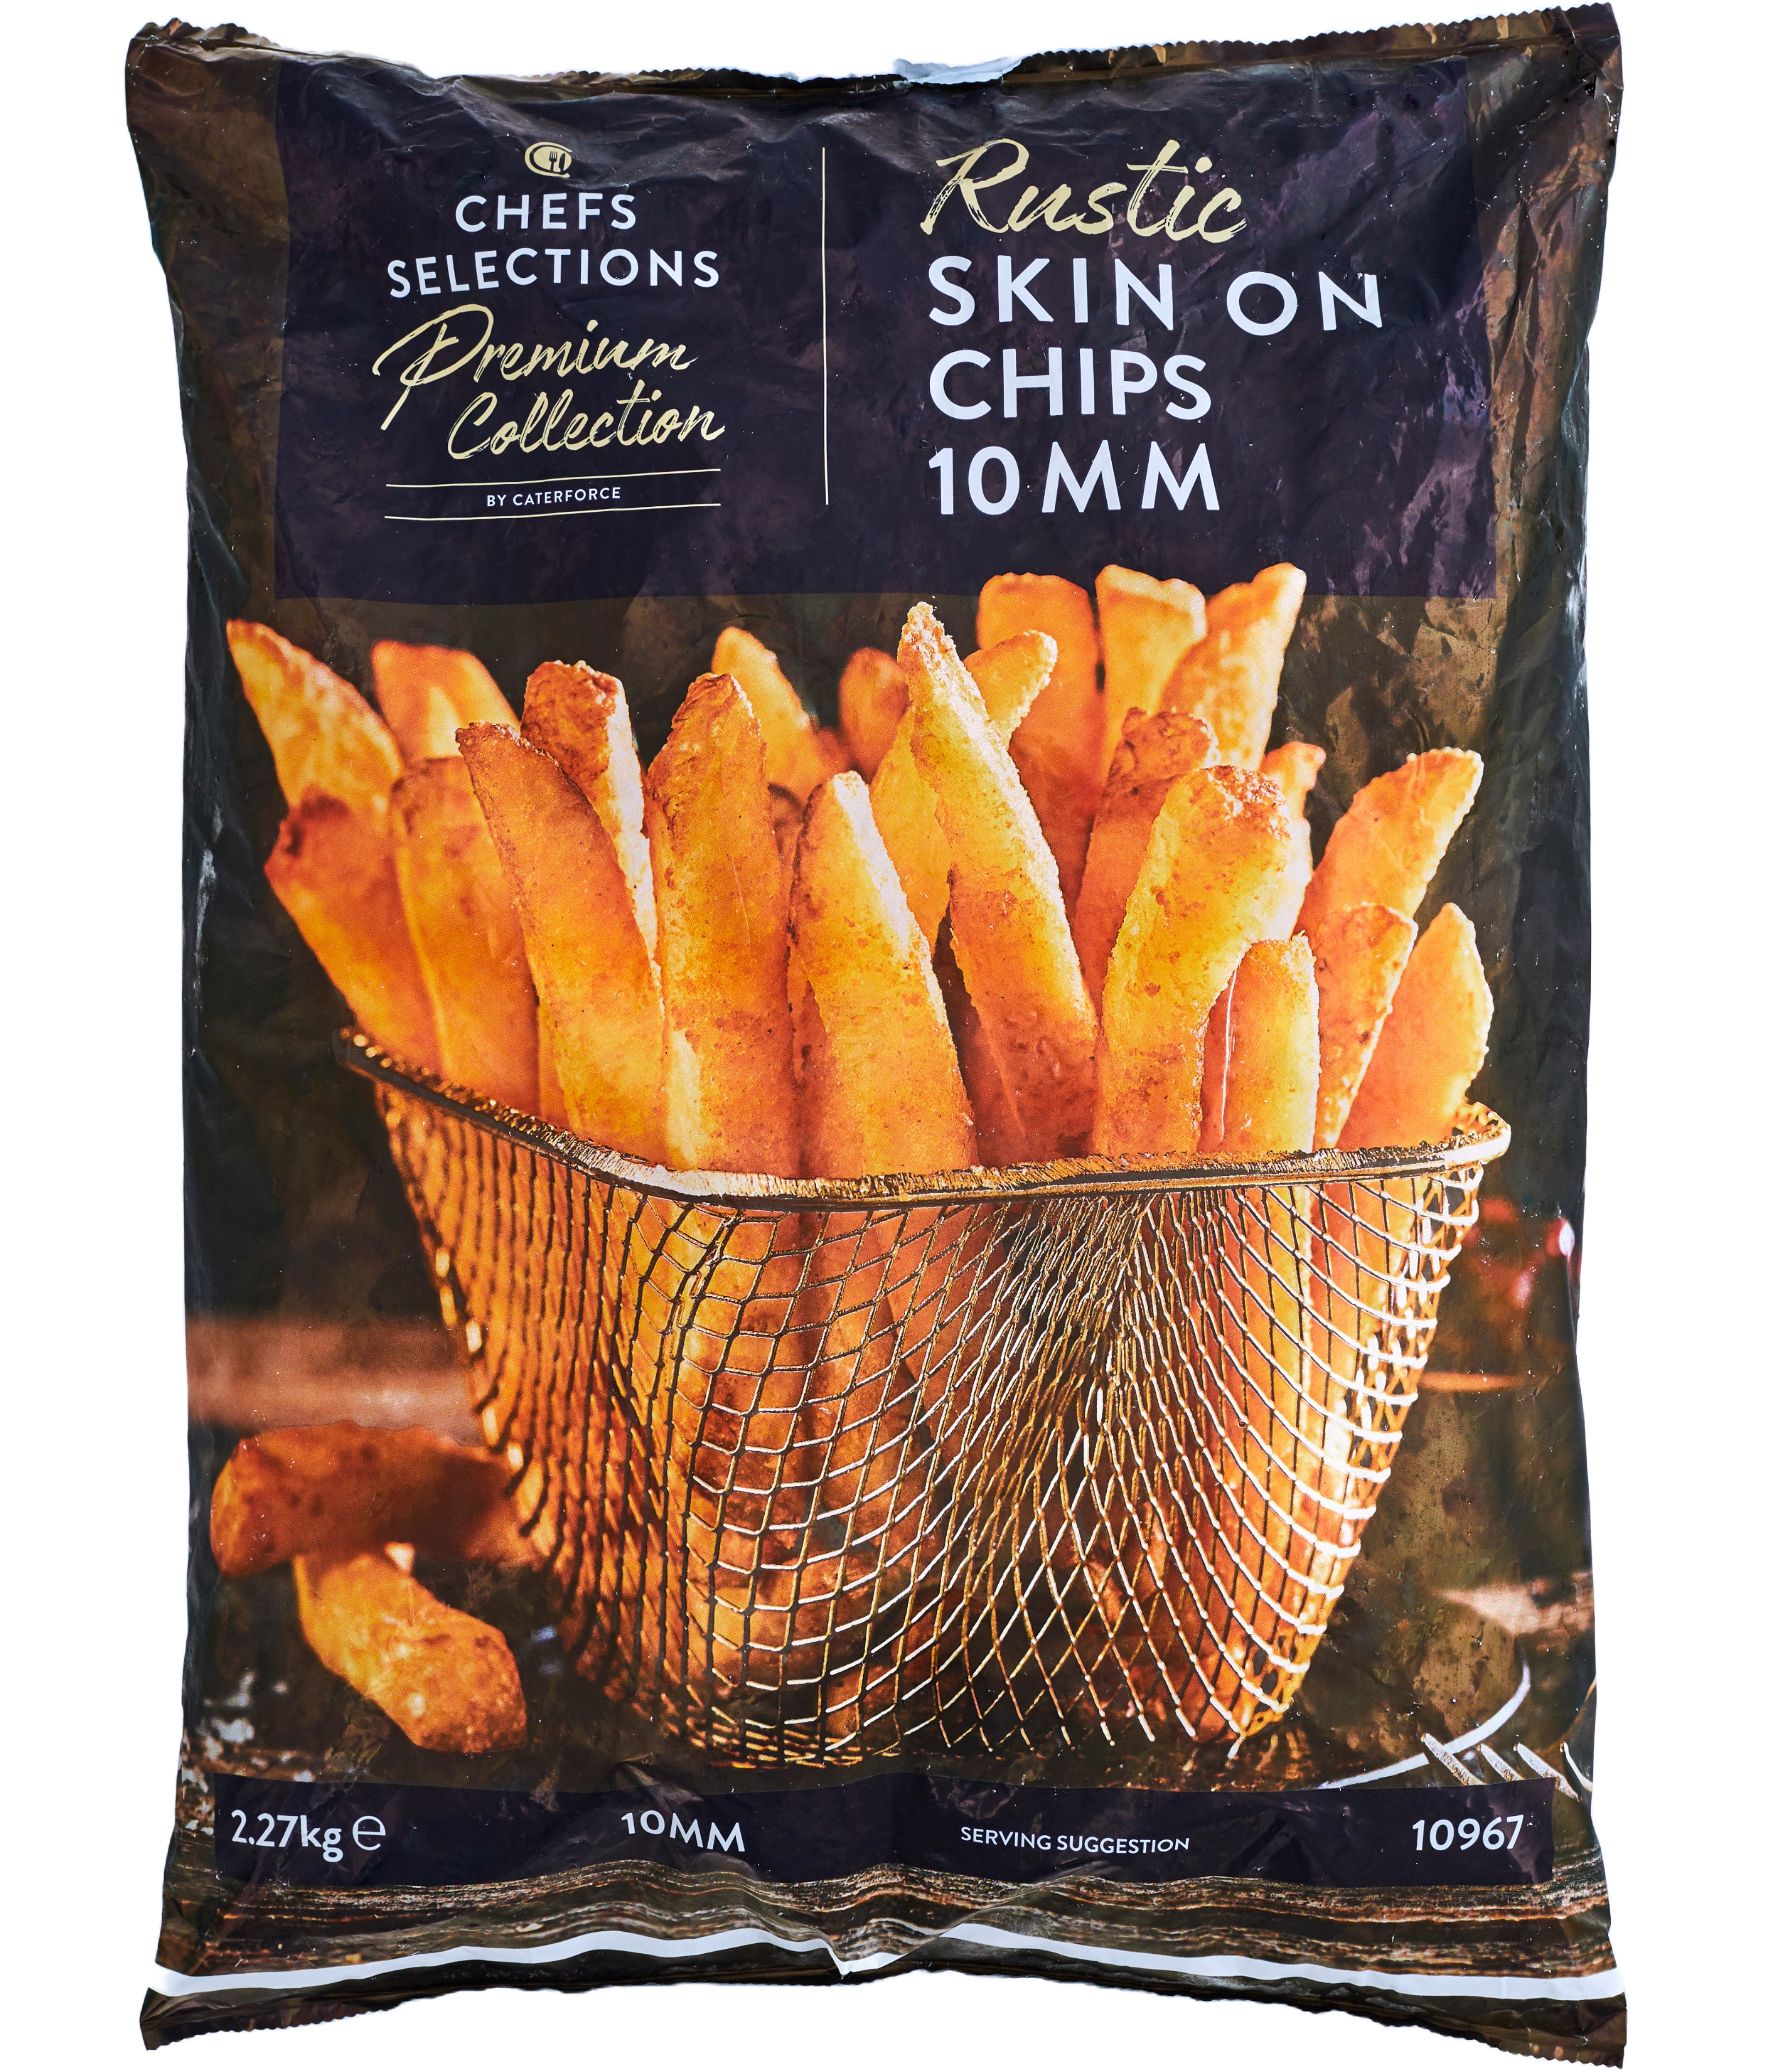 Chefs’ Selections Premium Rustic Skin-on Fries 10mm (4 x 2.27kg)